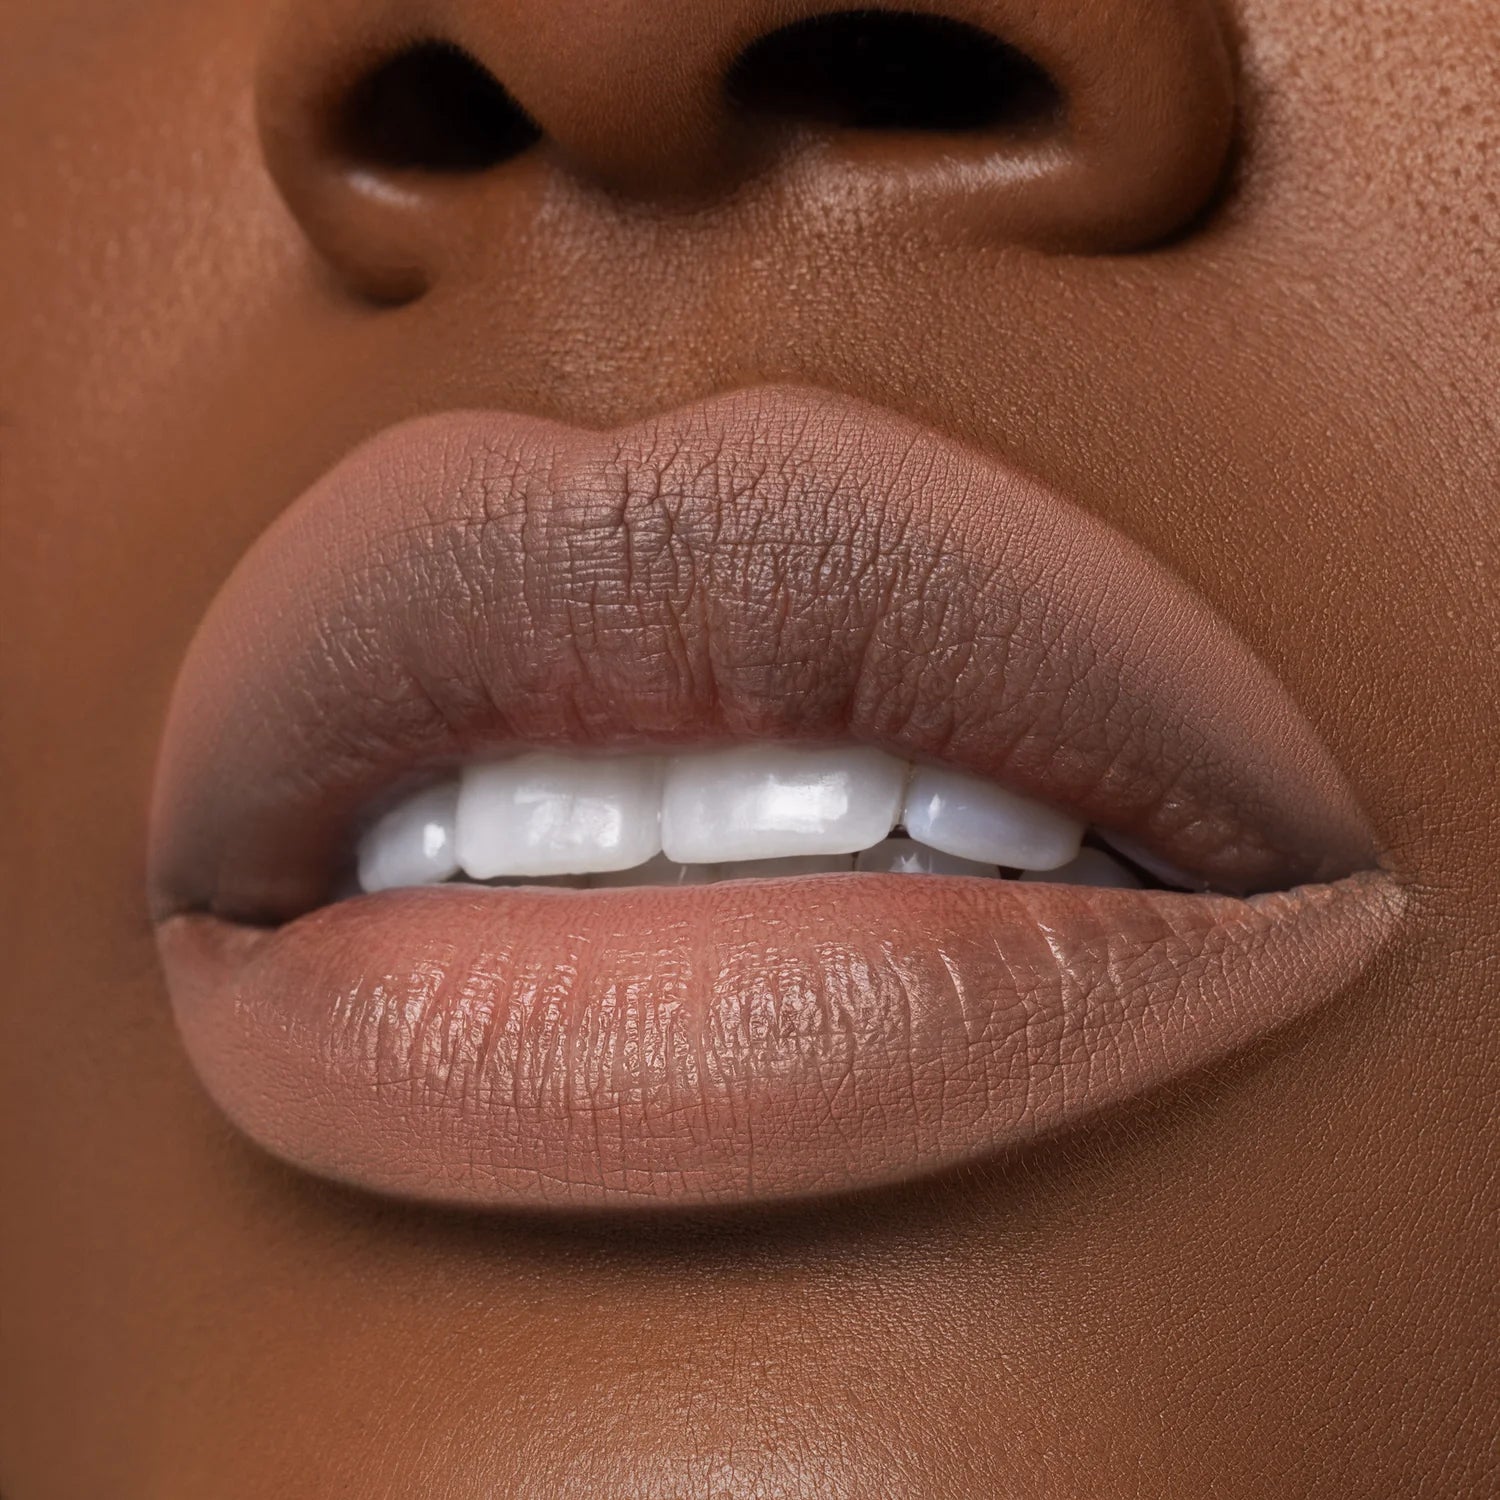 Beauty Creations - Nude X Lipliner Whatever You Want